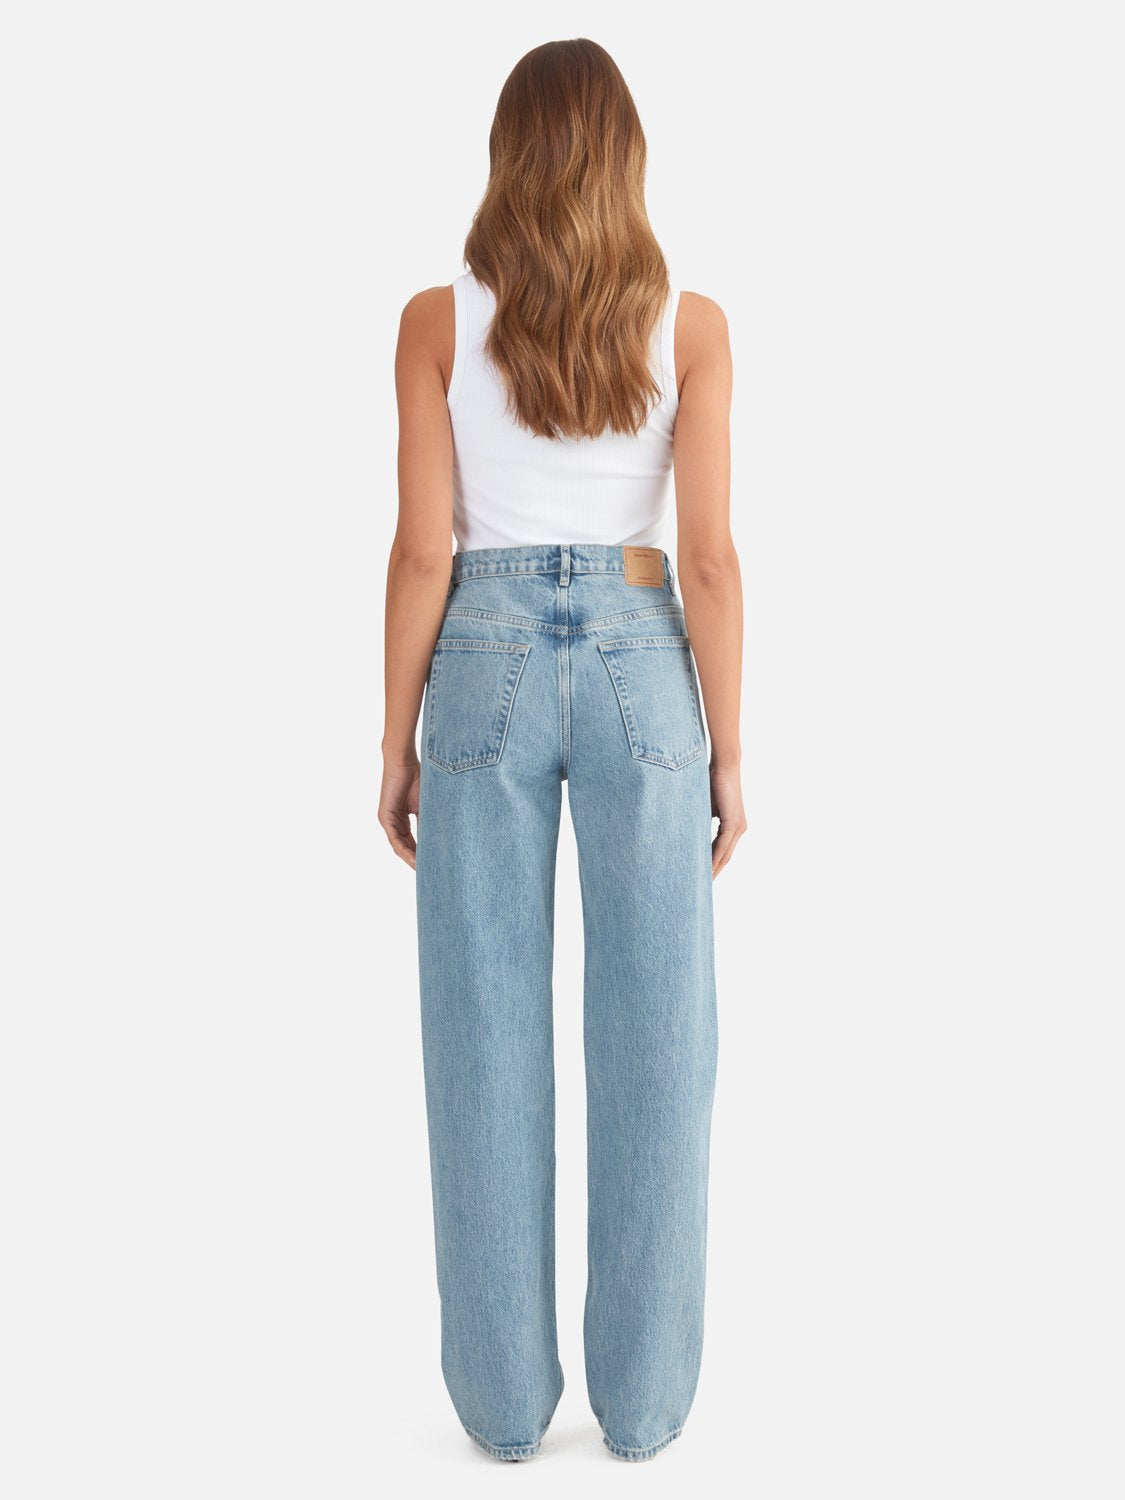 Danielle Relaxed Jean - Light Authentic Rigid